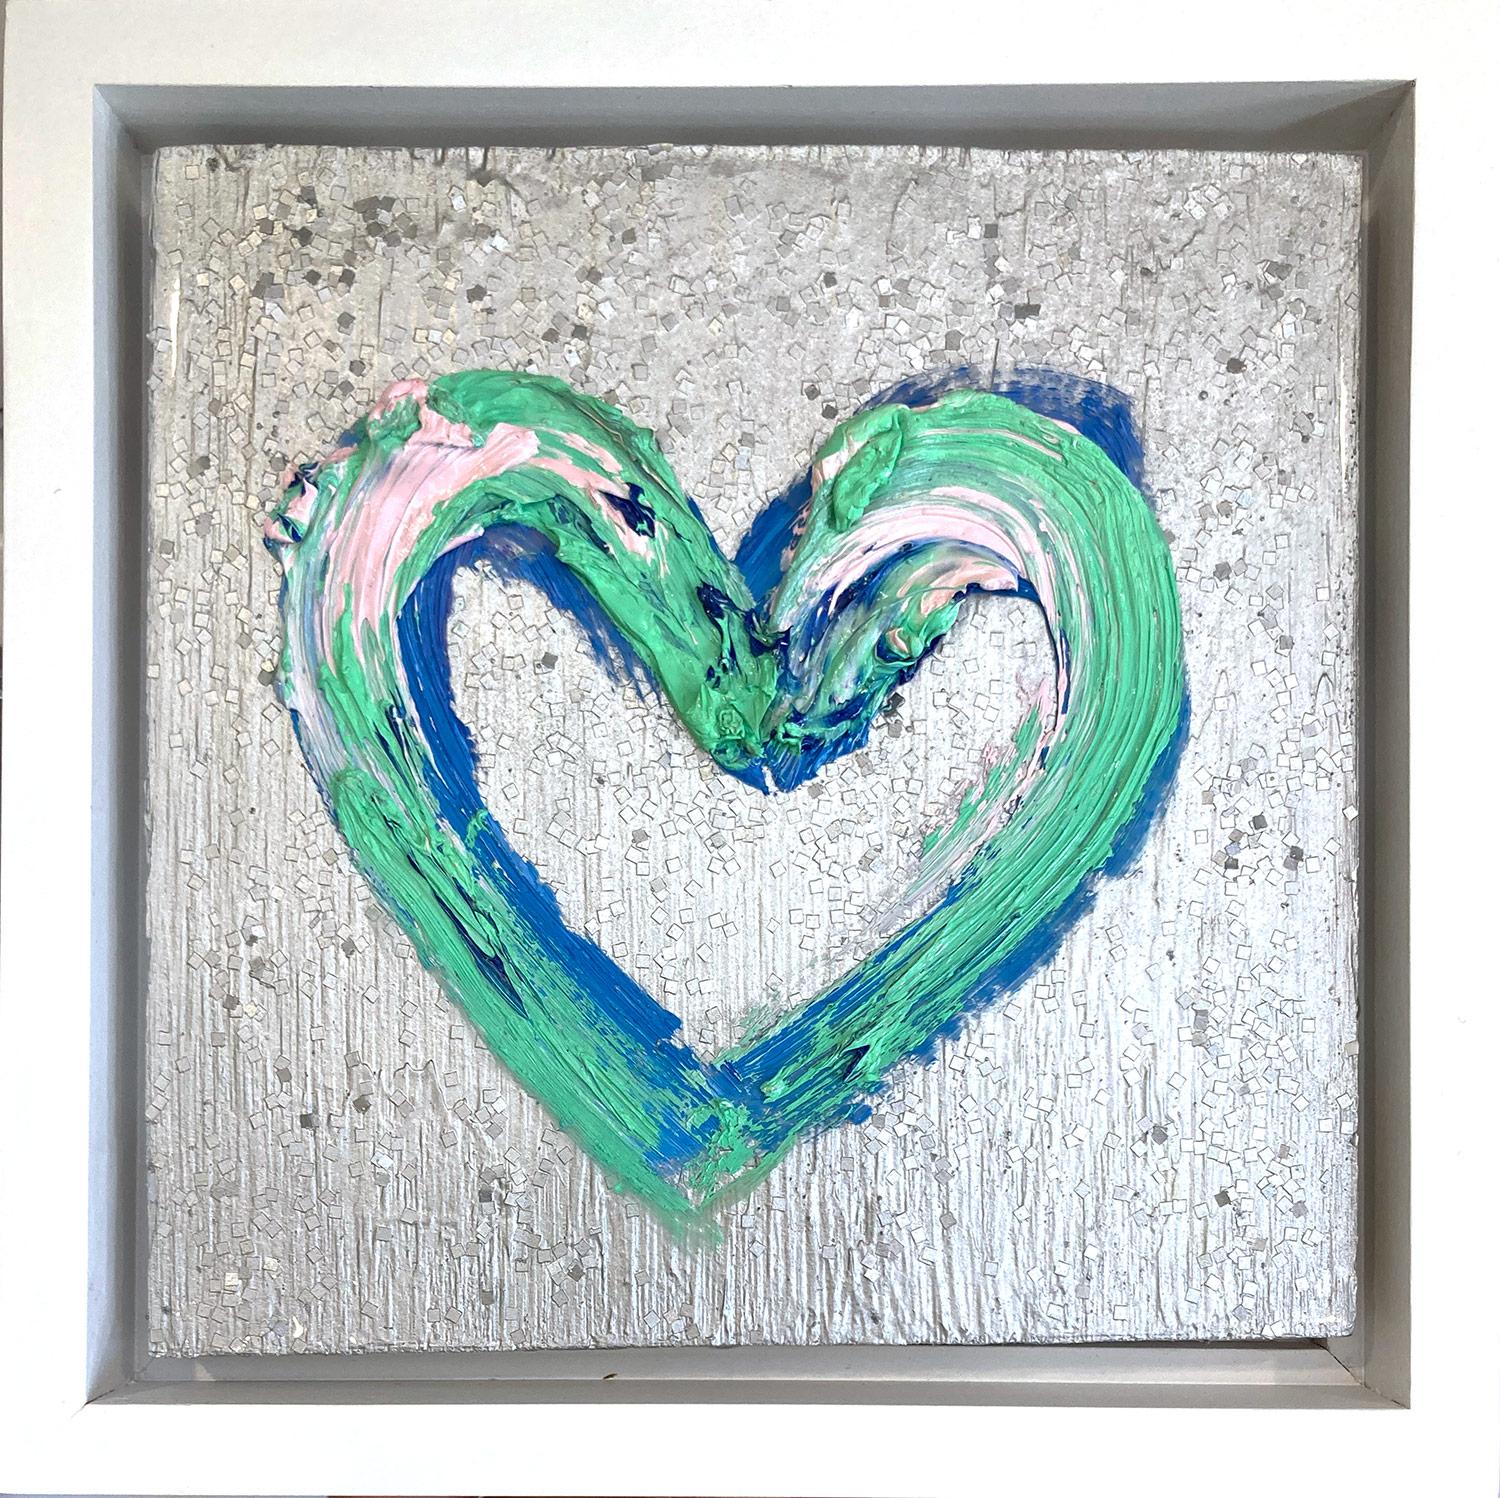 Cindy Shaoul Abstract Painting - "My Penny Lane Heart" Colorful Pop Art Oil Painting with White Floater Frame